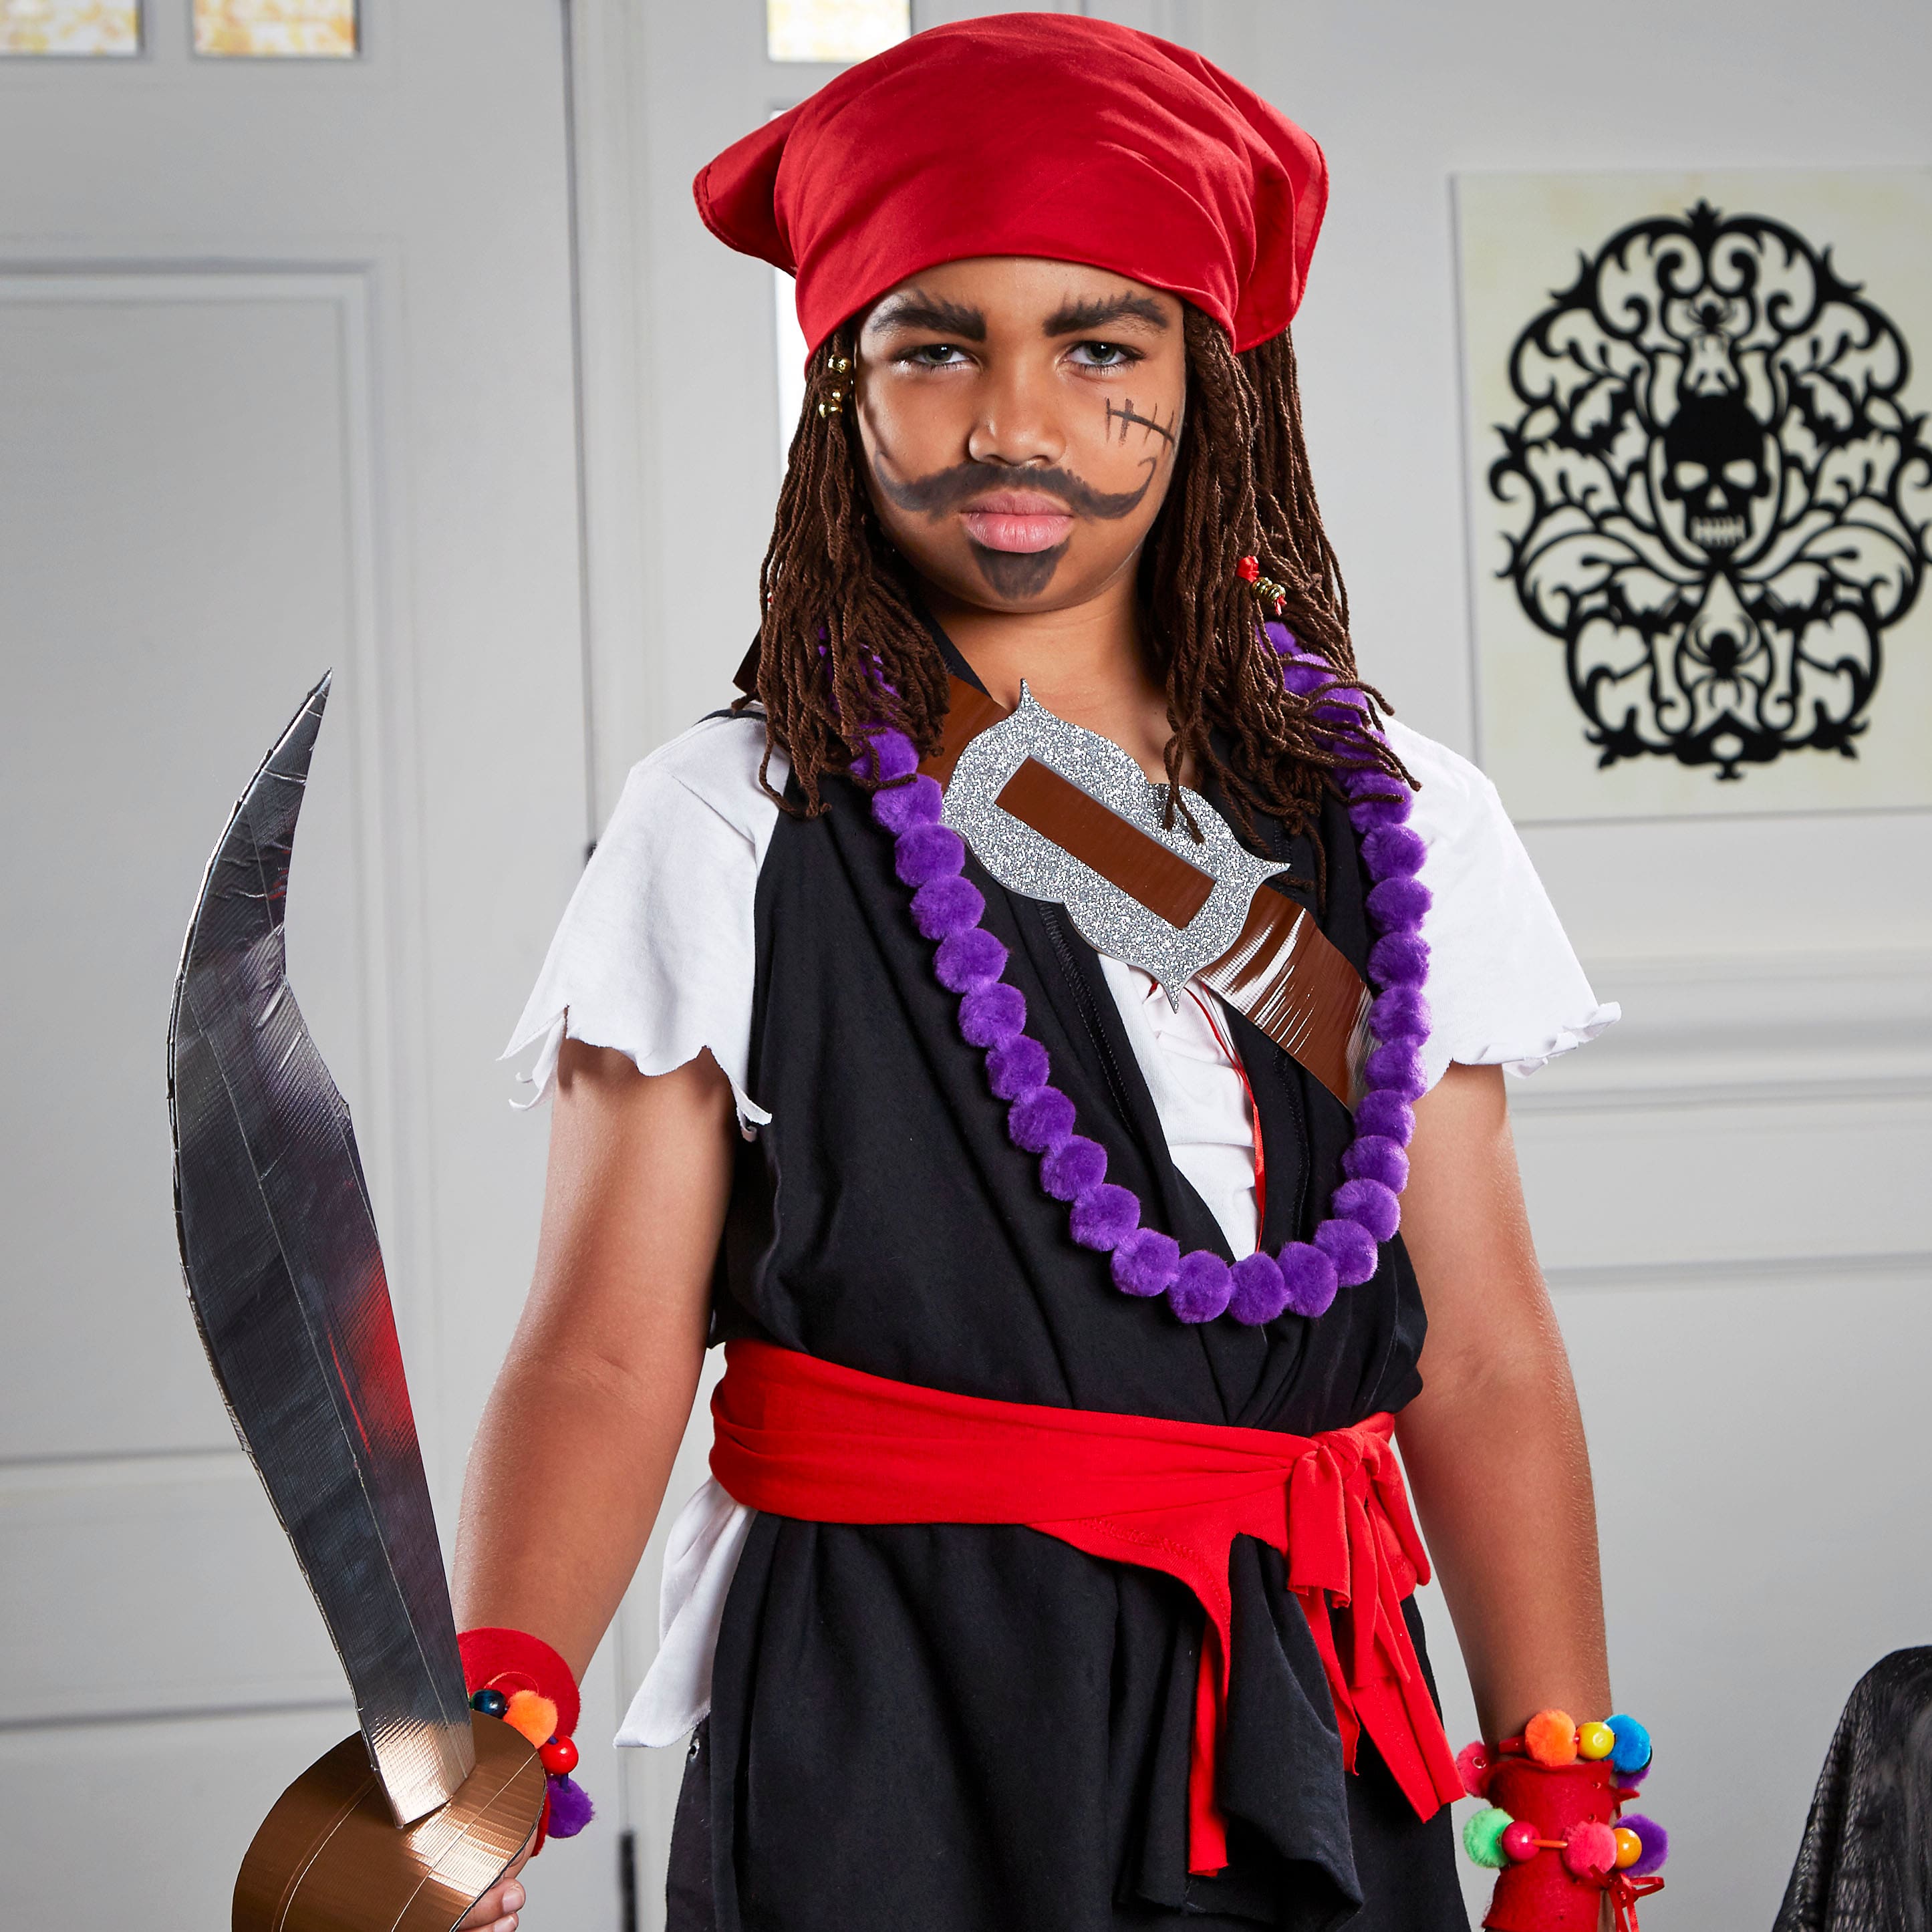 Kids Pirate Halloween Costume, Projects